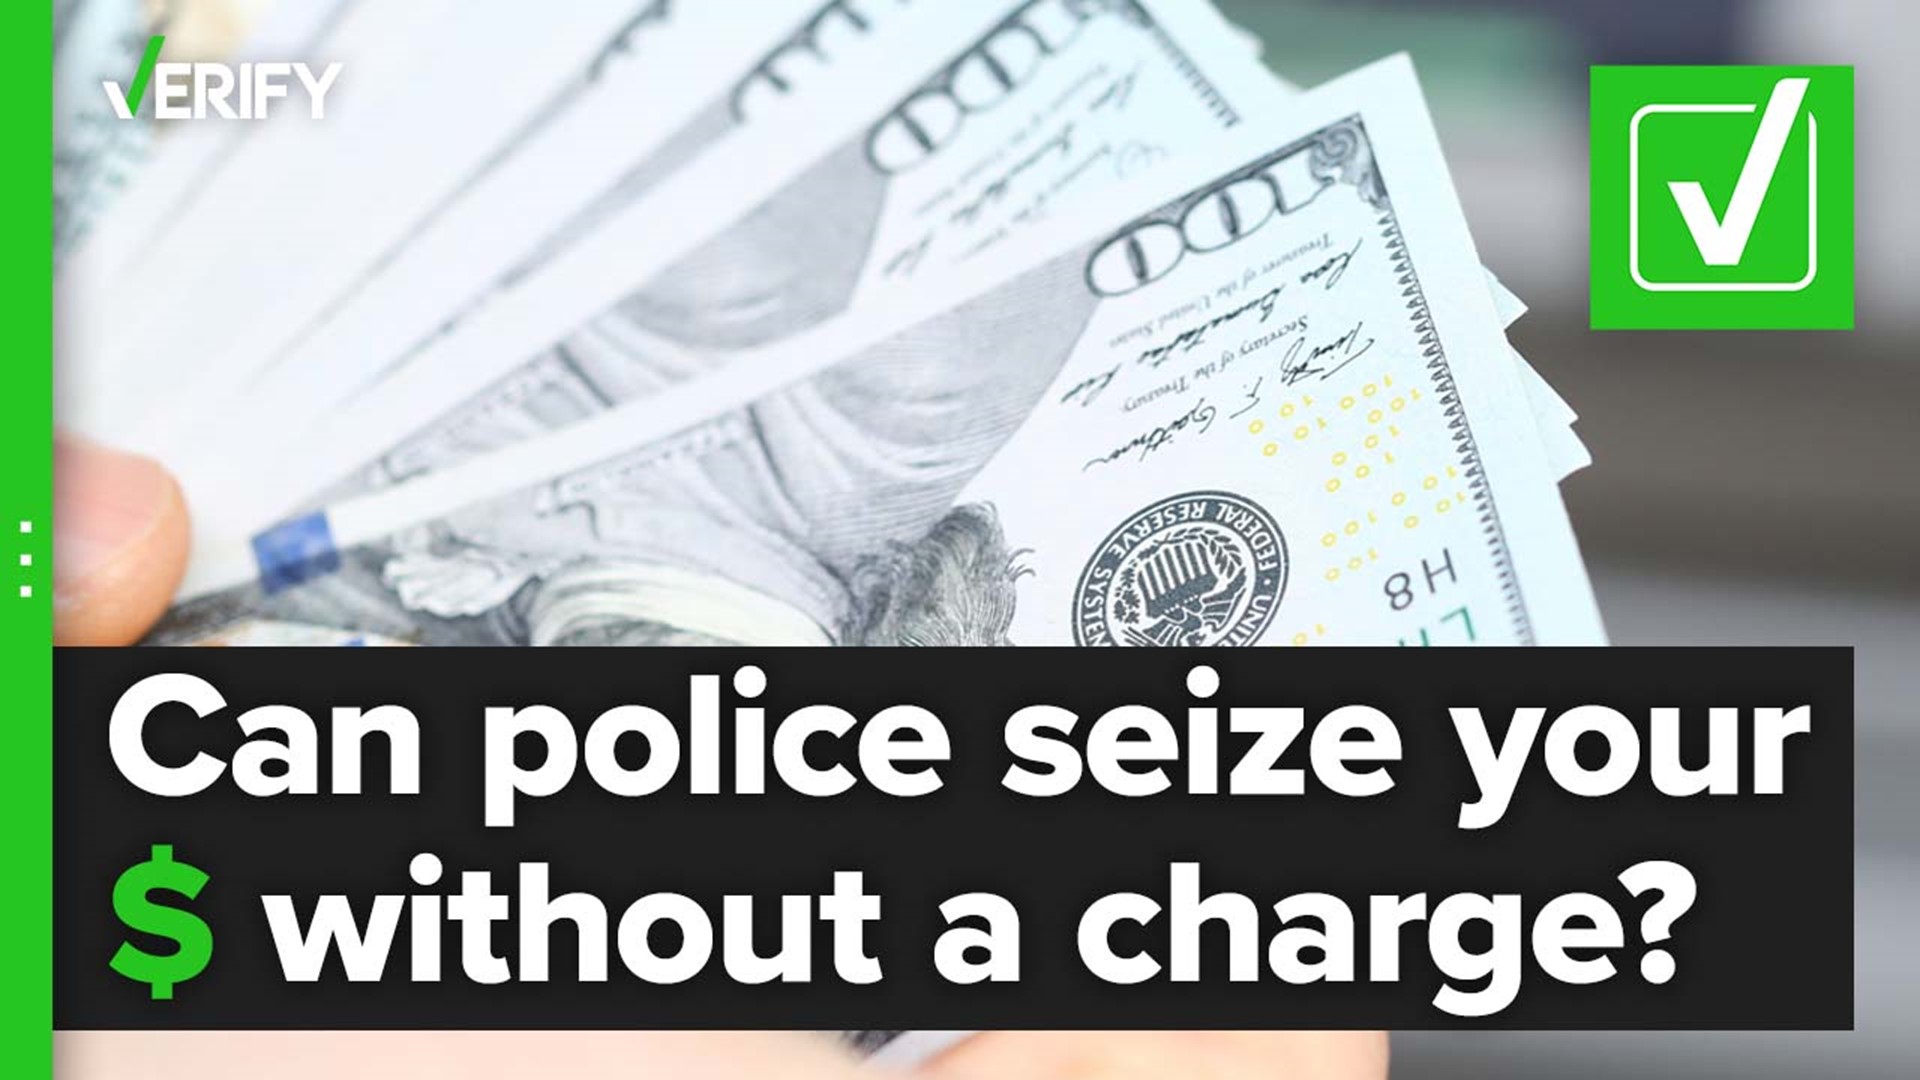 Through a process called civil forfeiture, the government can seize your money if they believe it is linked to a crime.